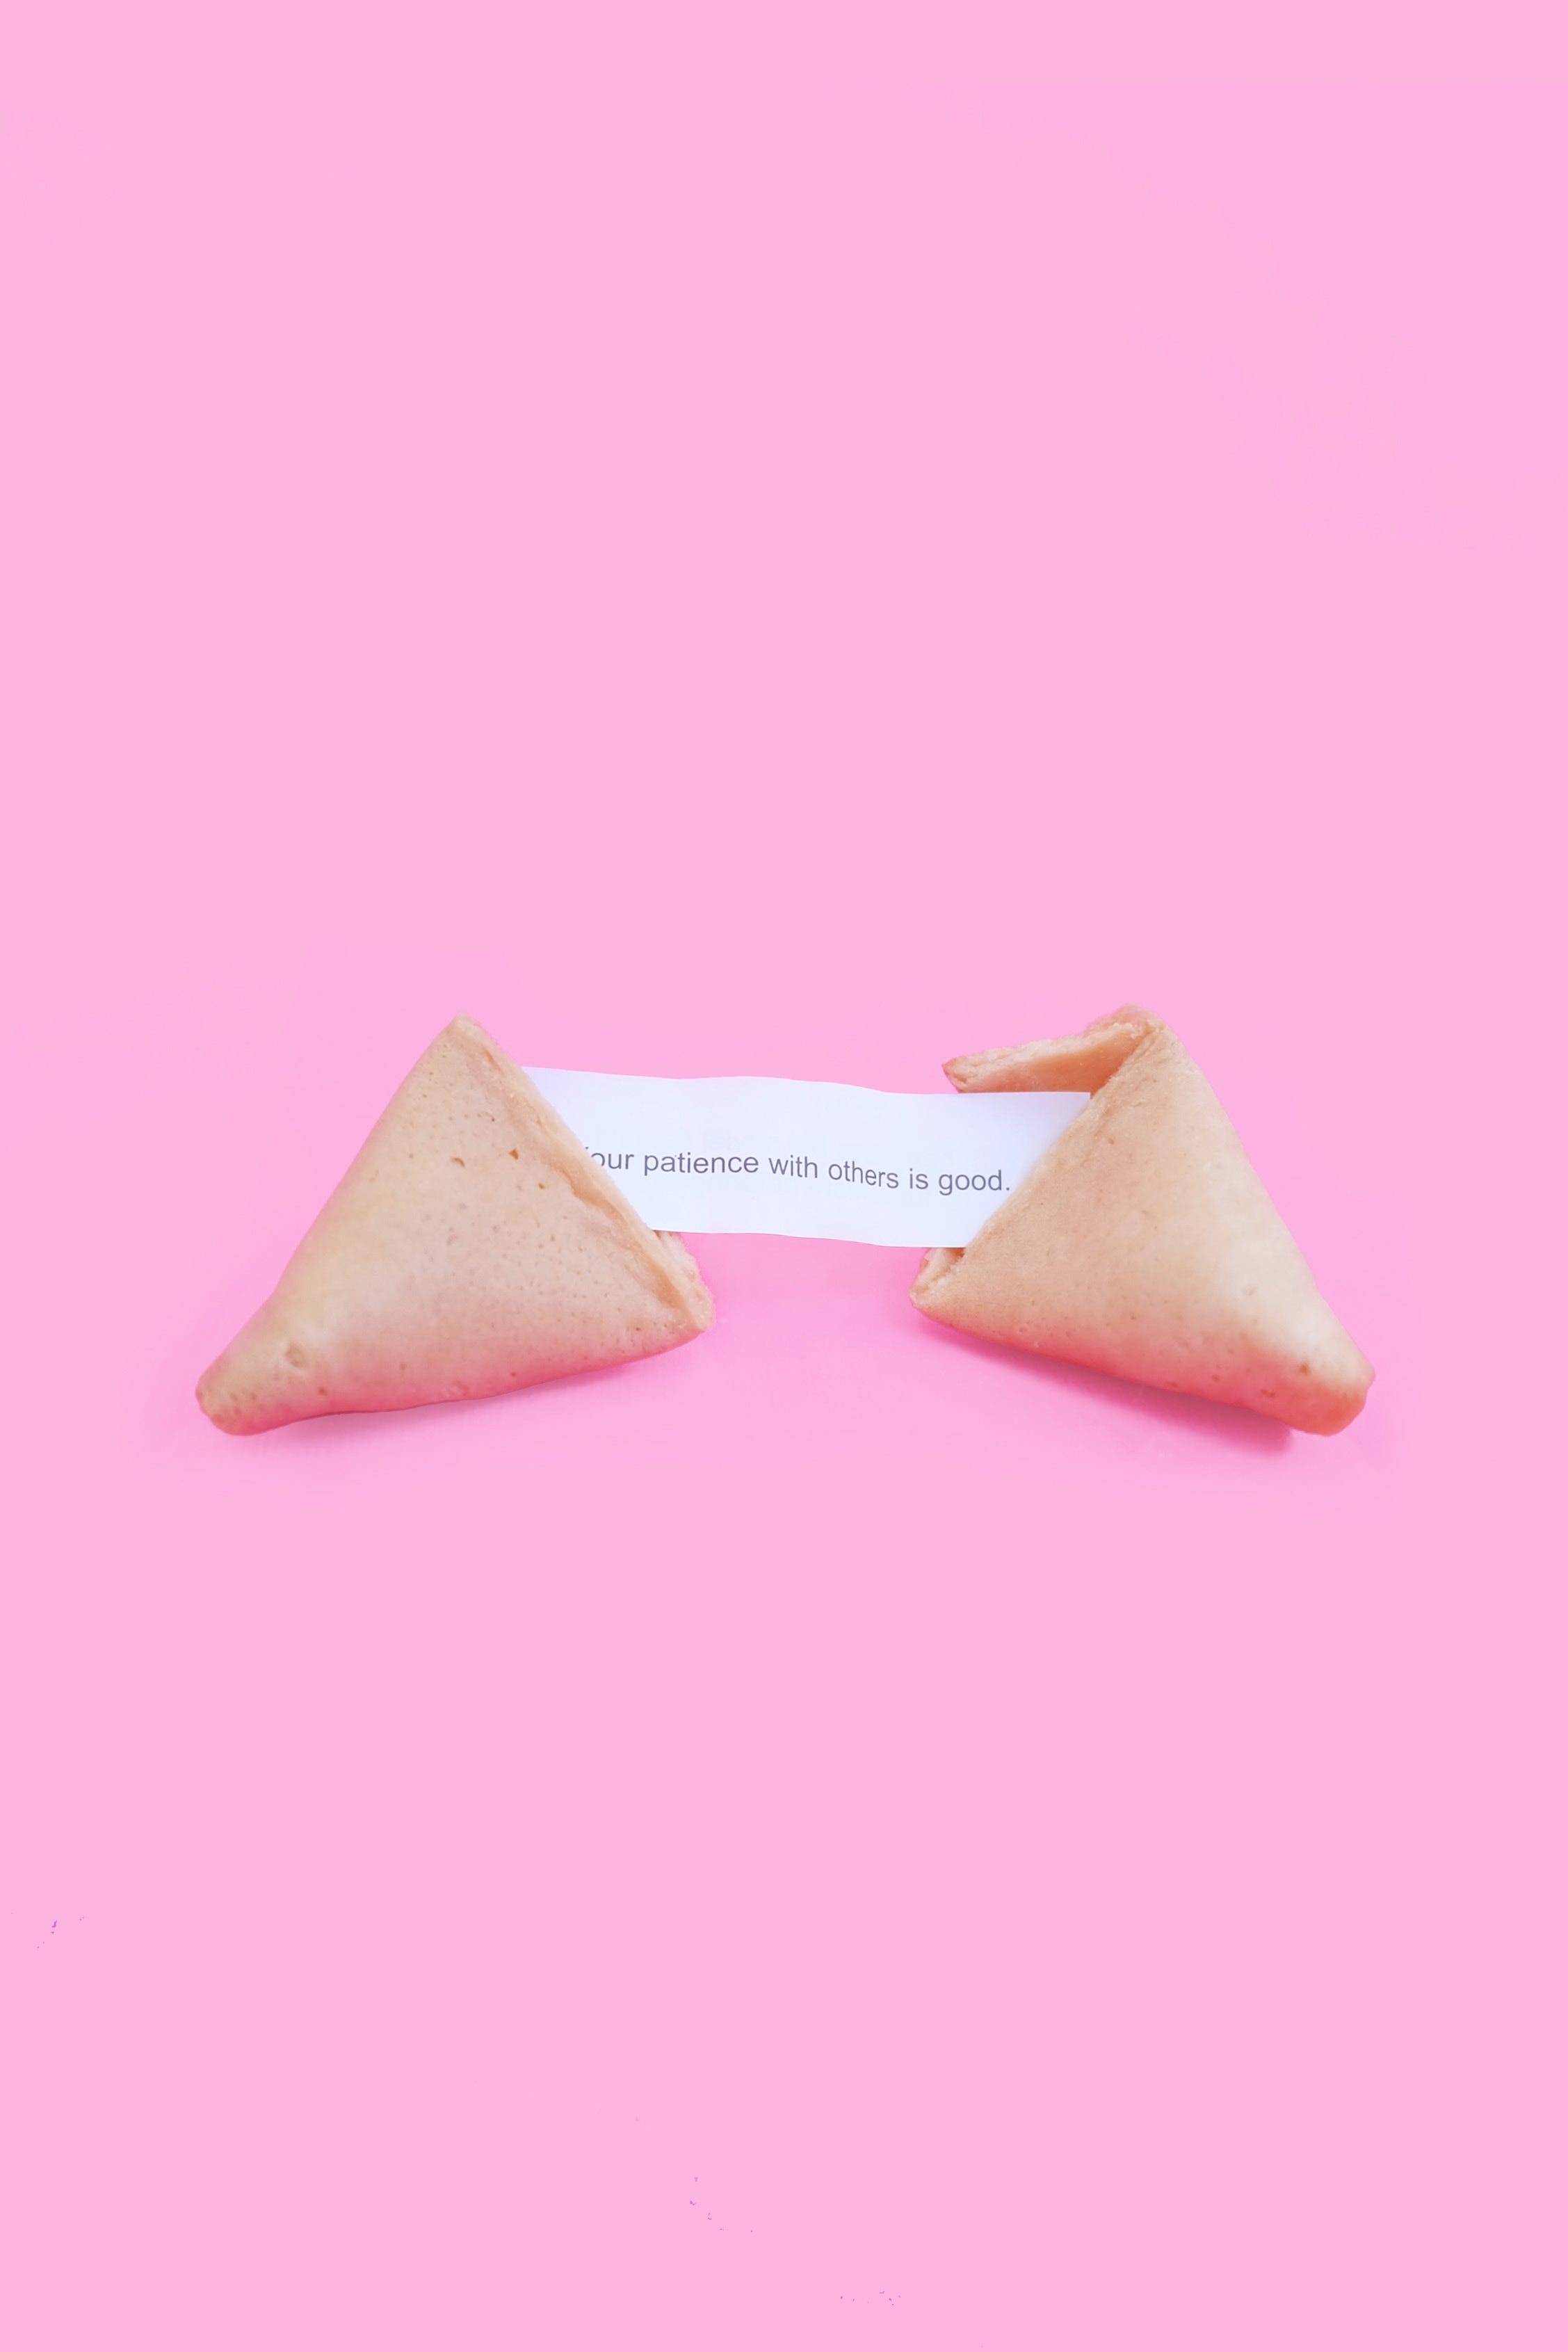 Complimentary Fortune Cookie Fortunes